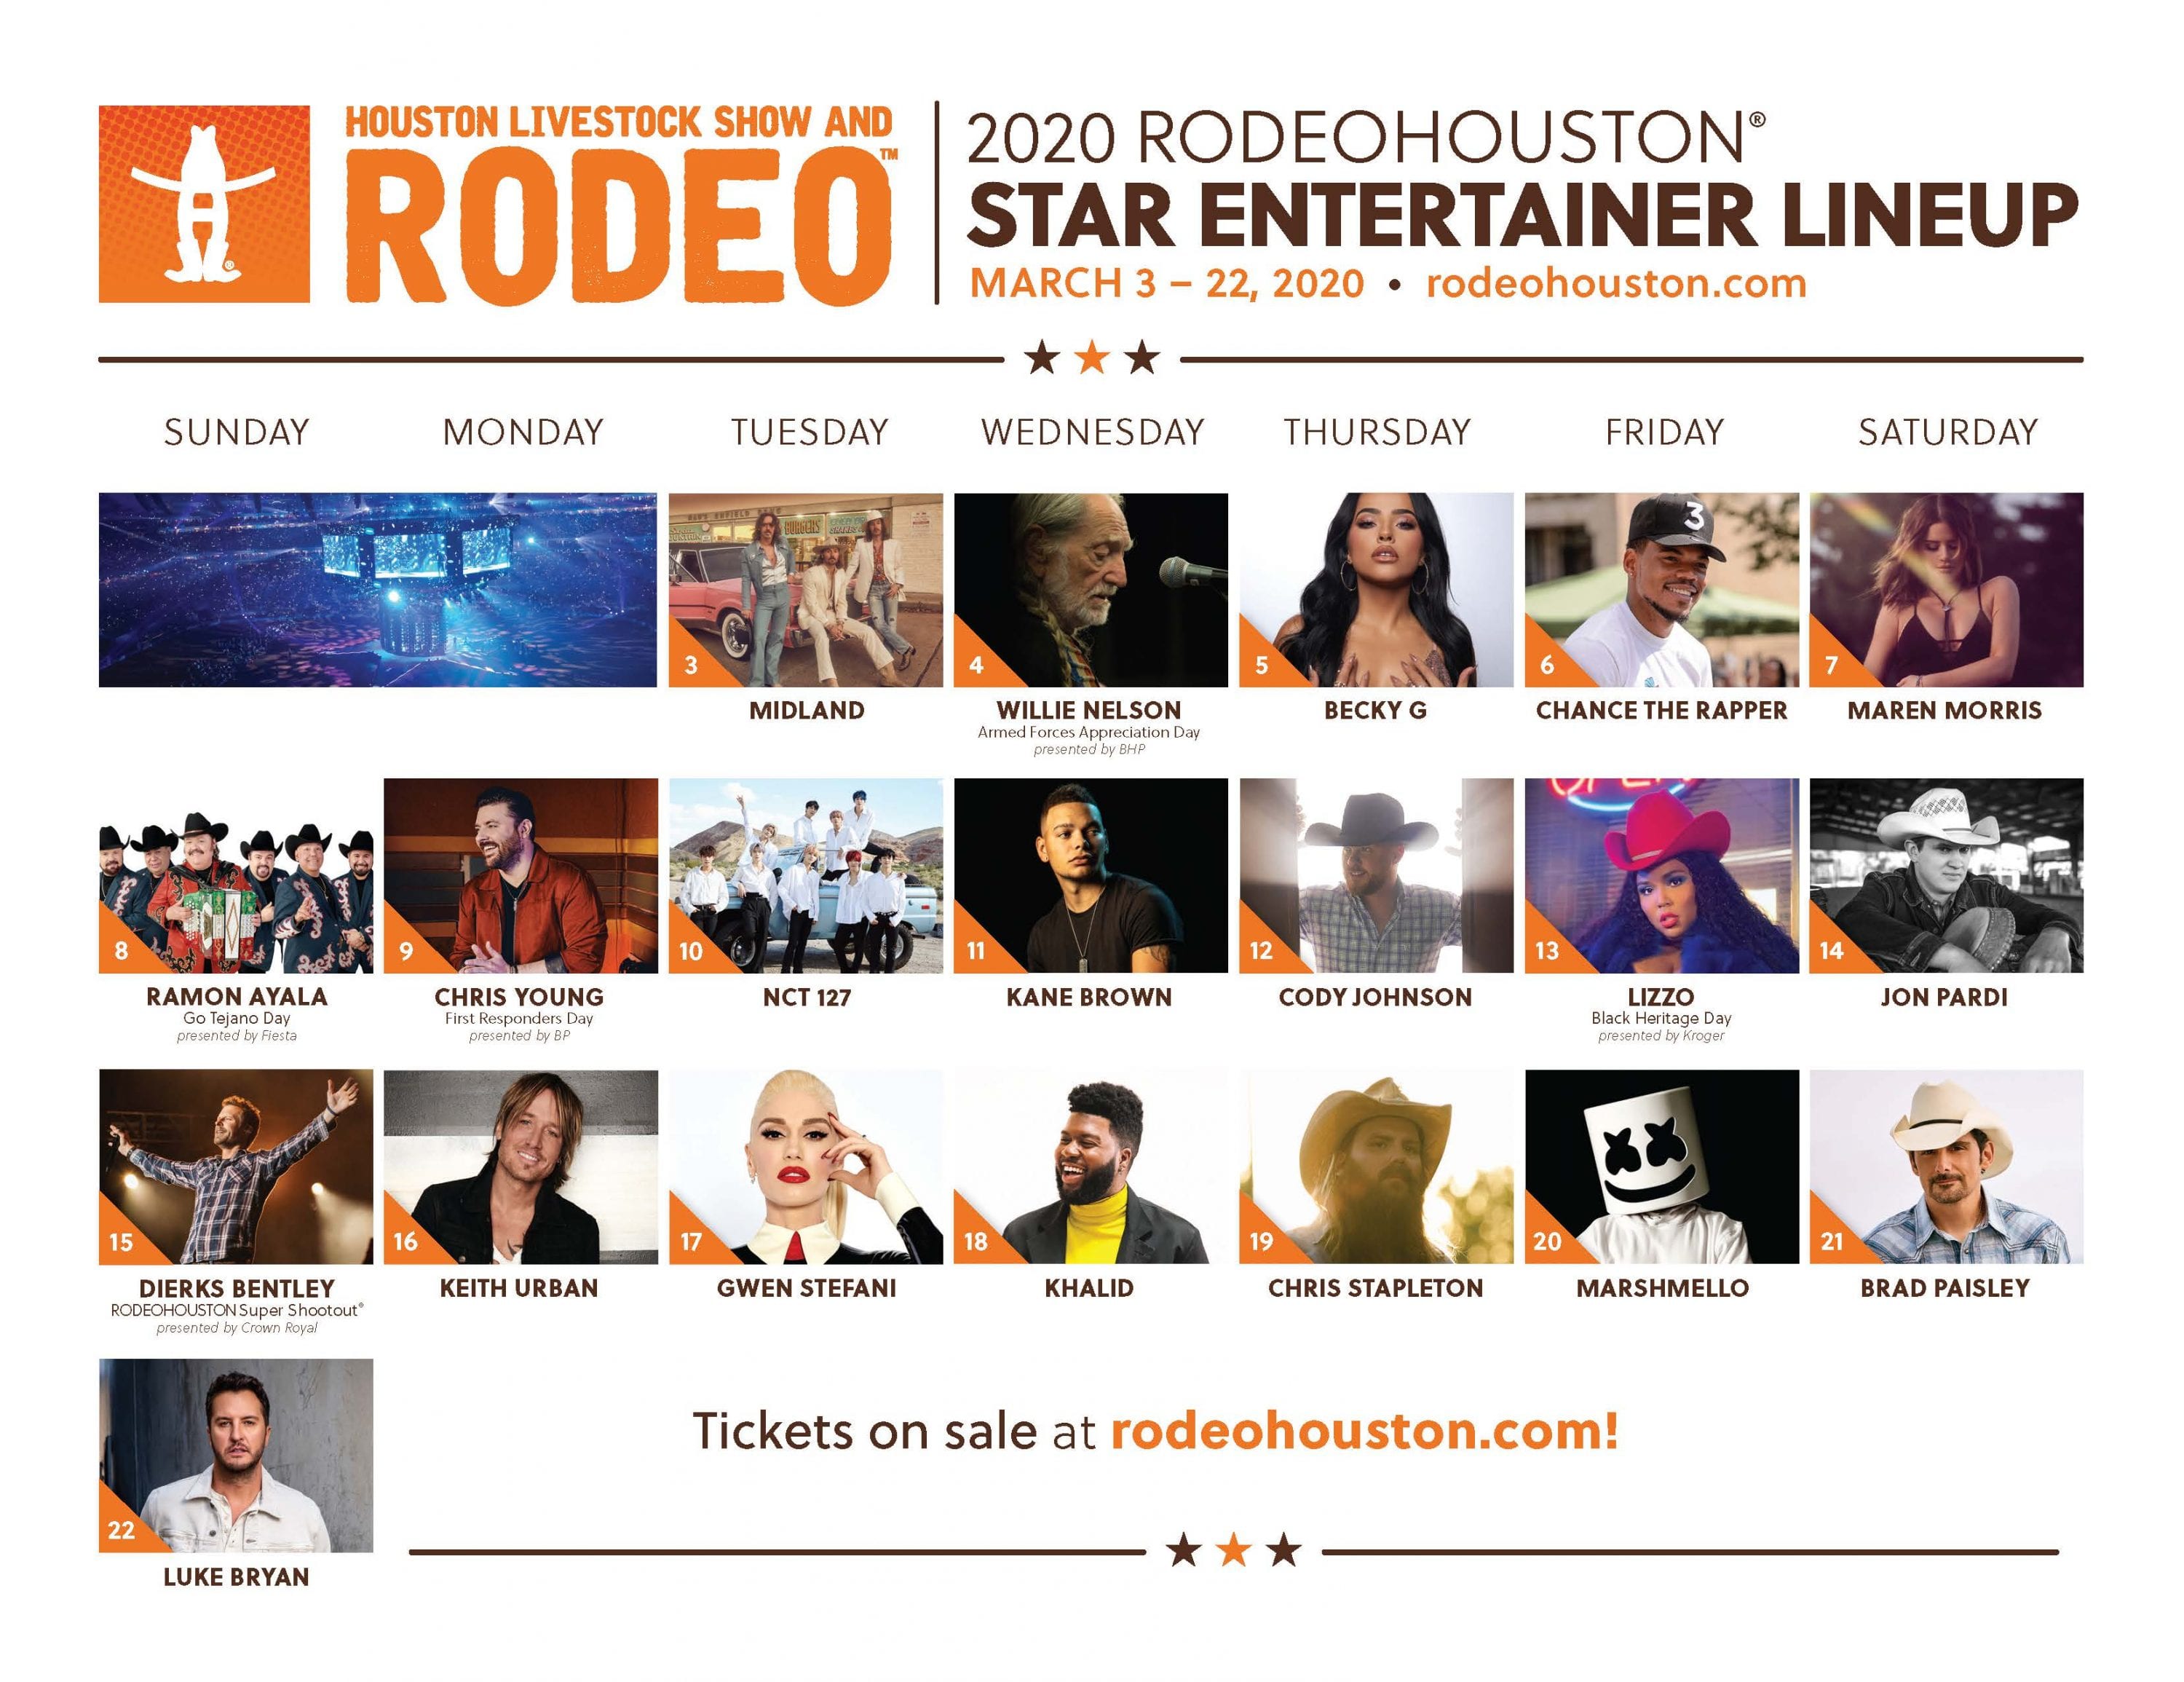 It’s that time again folks… check out the Houston Livestock Show and Rodeo’s 2020 Lineup!